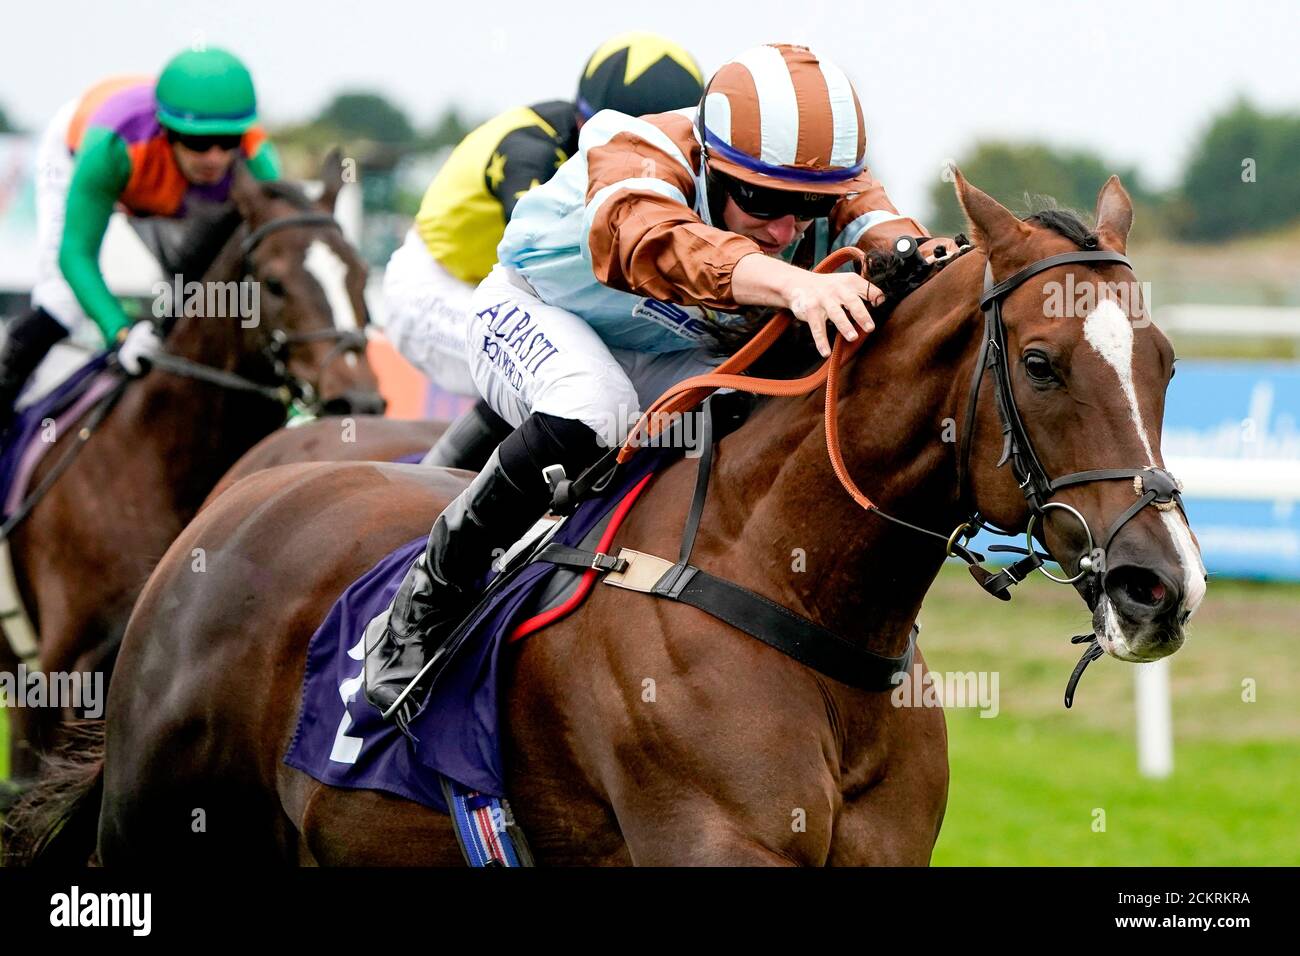 Caspian Prince ridden by jockey Tom Marquand on their way to winning the Free Tips Daily On attheraces.com Handicap at Great Yarmouth Racecourse. Stock Photo